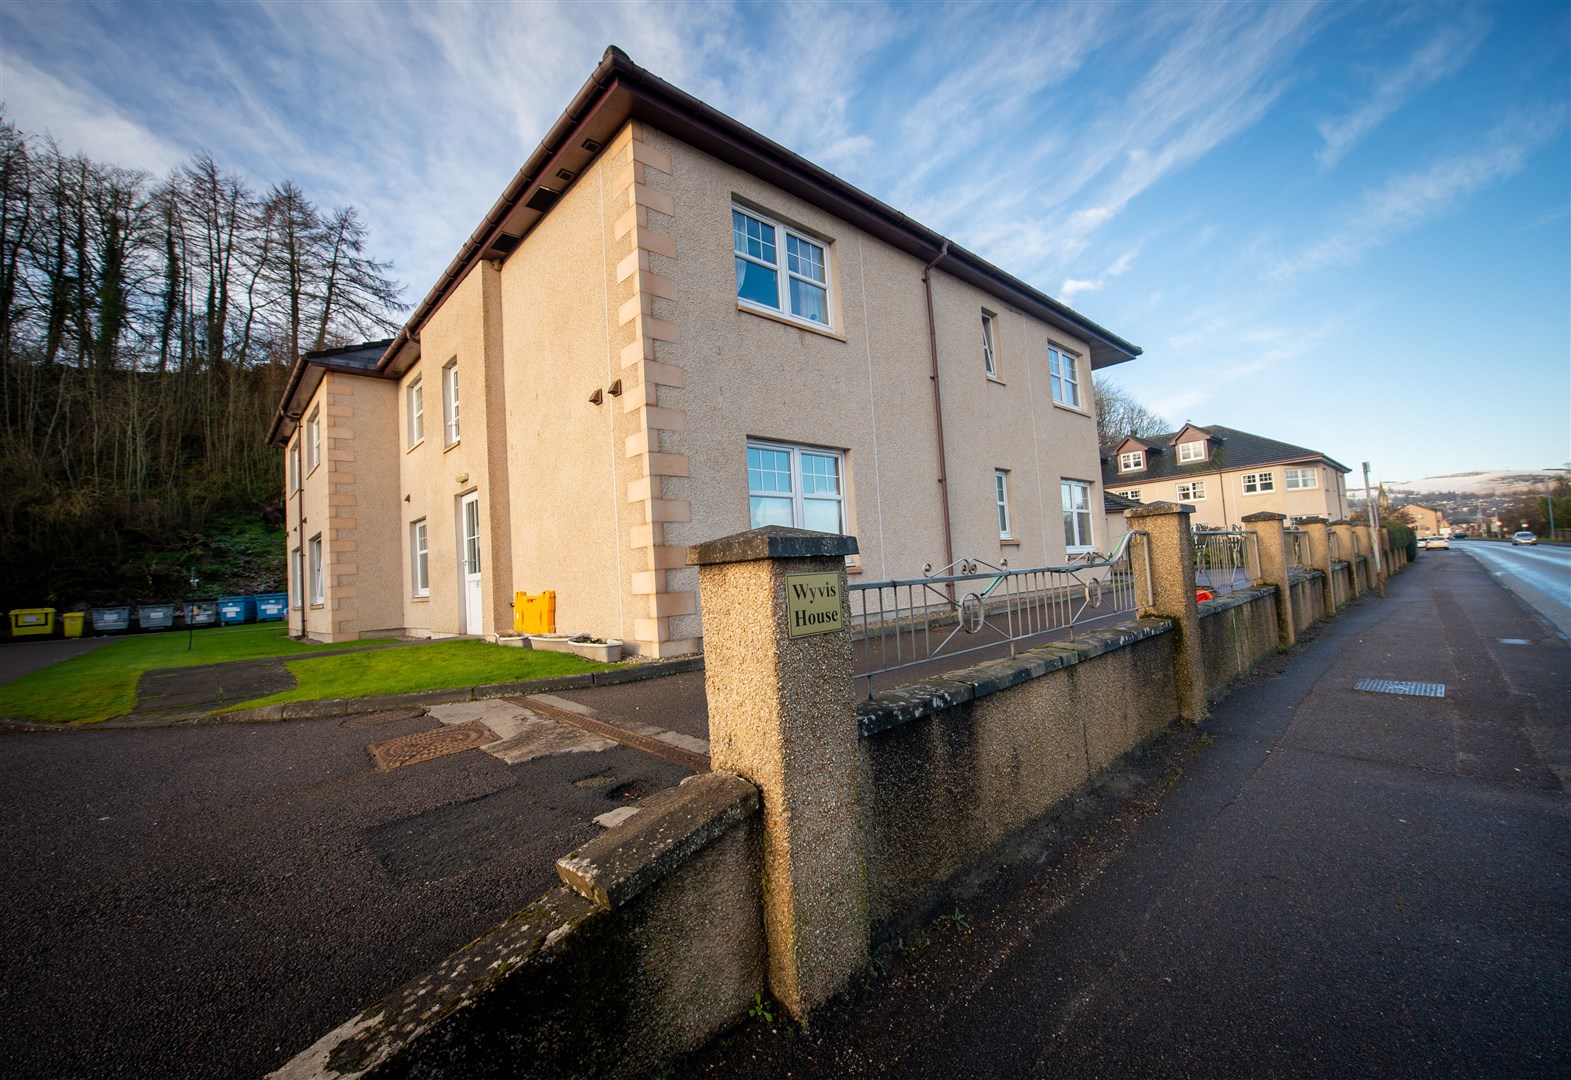 Wyvis House Care Home, Station Road, Dingwall.